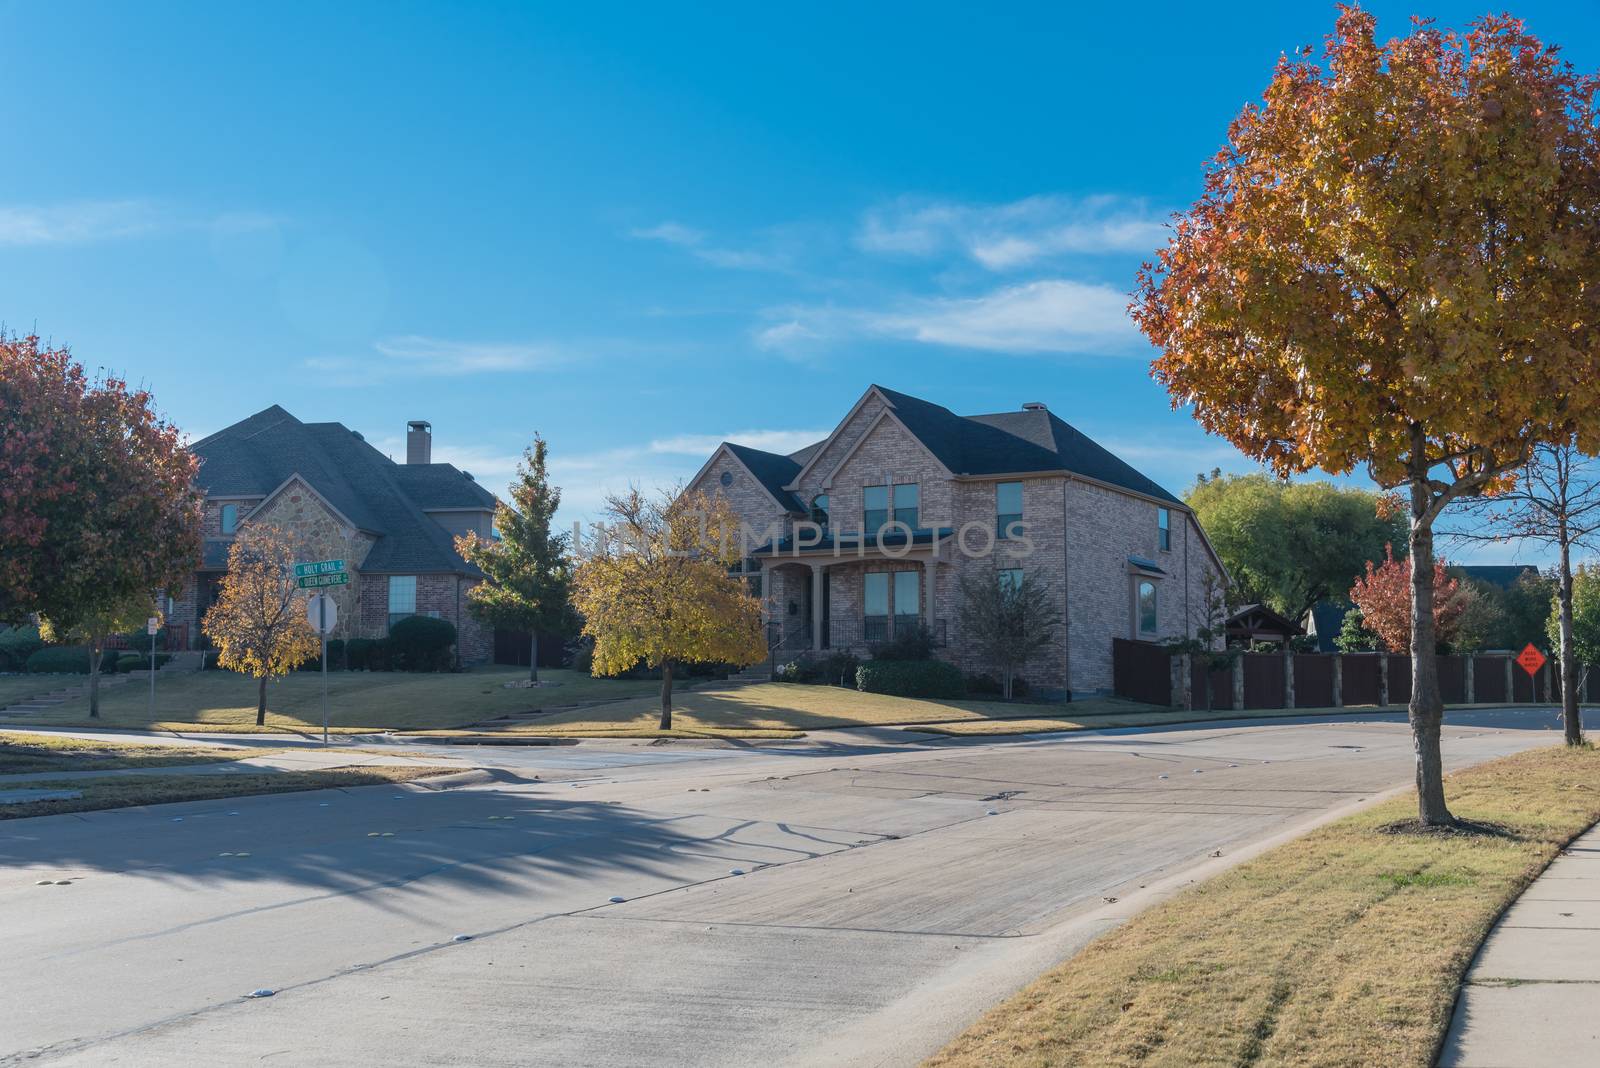 Quite new development subdivision with row of suburban houses and colorful fall foliage along sidewalk near Dallas, Texas, USA by trongnguyen